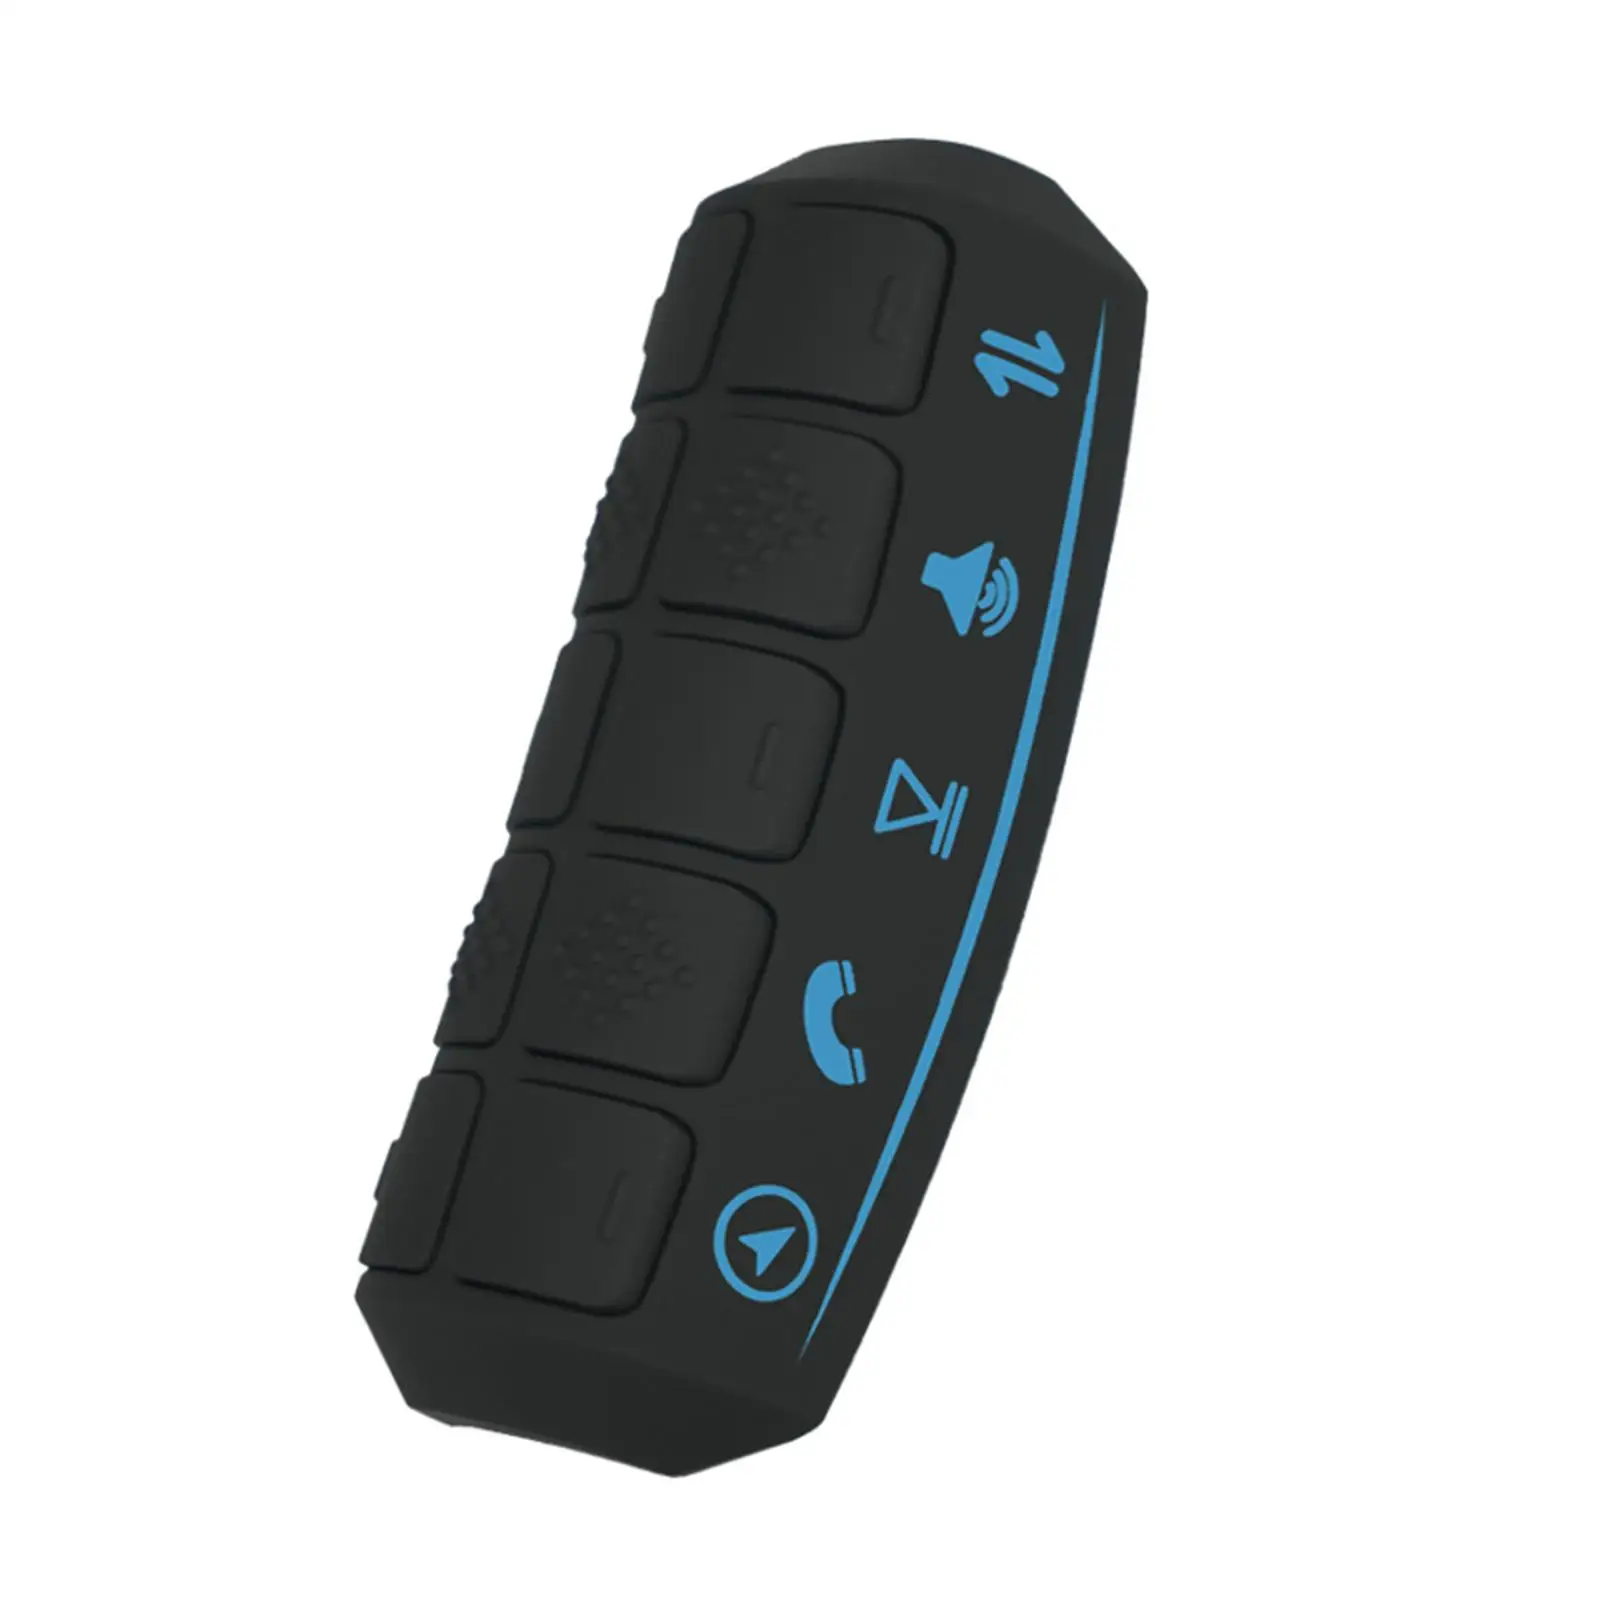 Car Steering Wheel Remote Control Fits for Android Car Radio Car Media